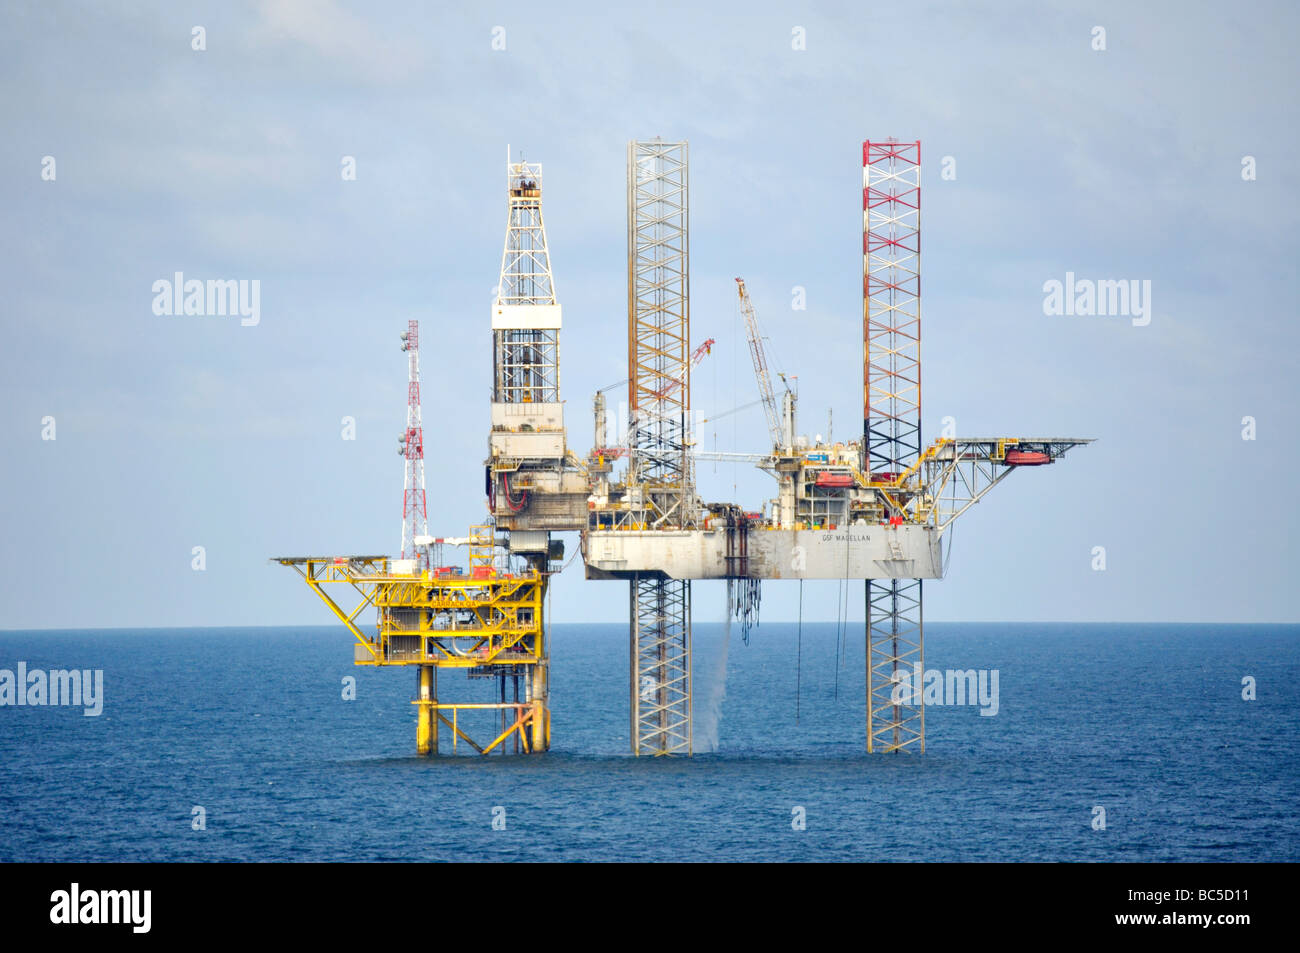 An offshore oil platform, North Sea, Europe Stock Photo